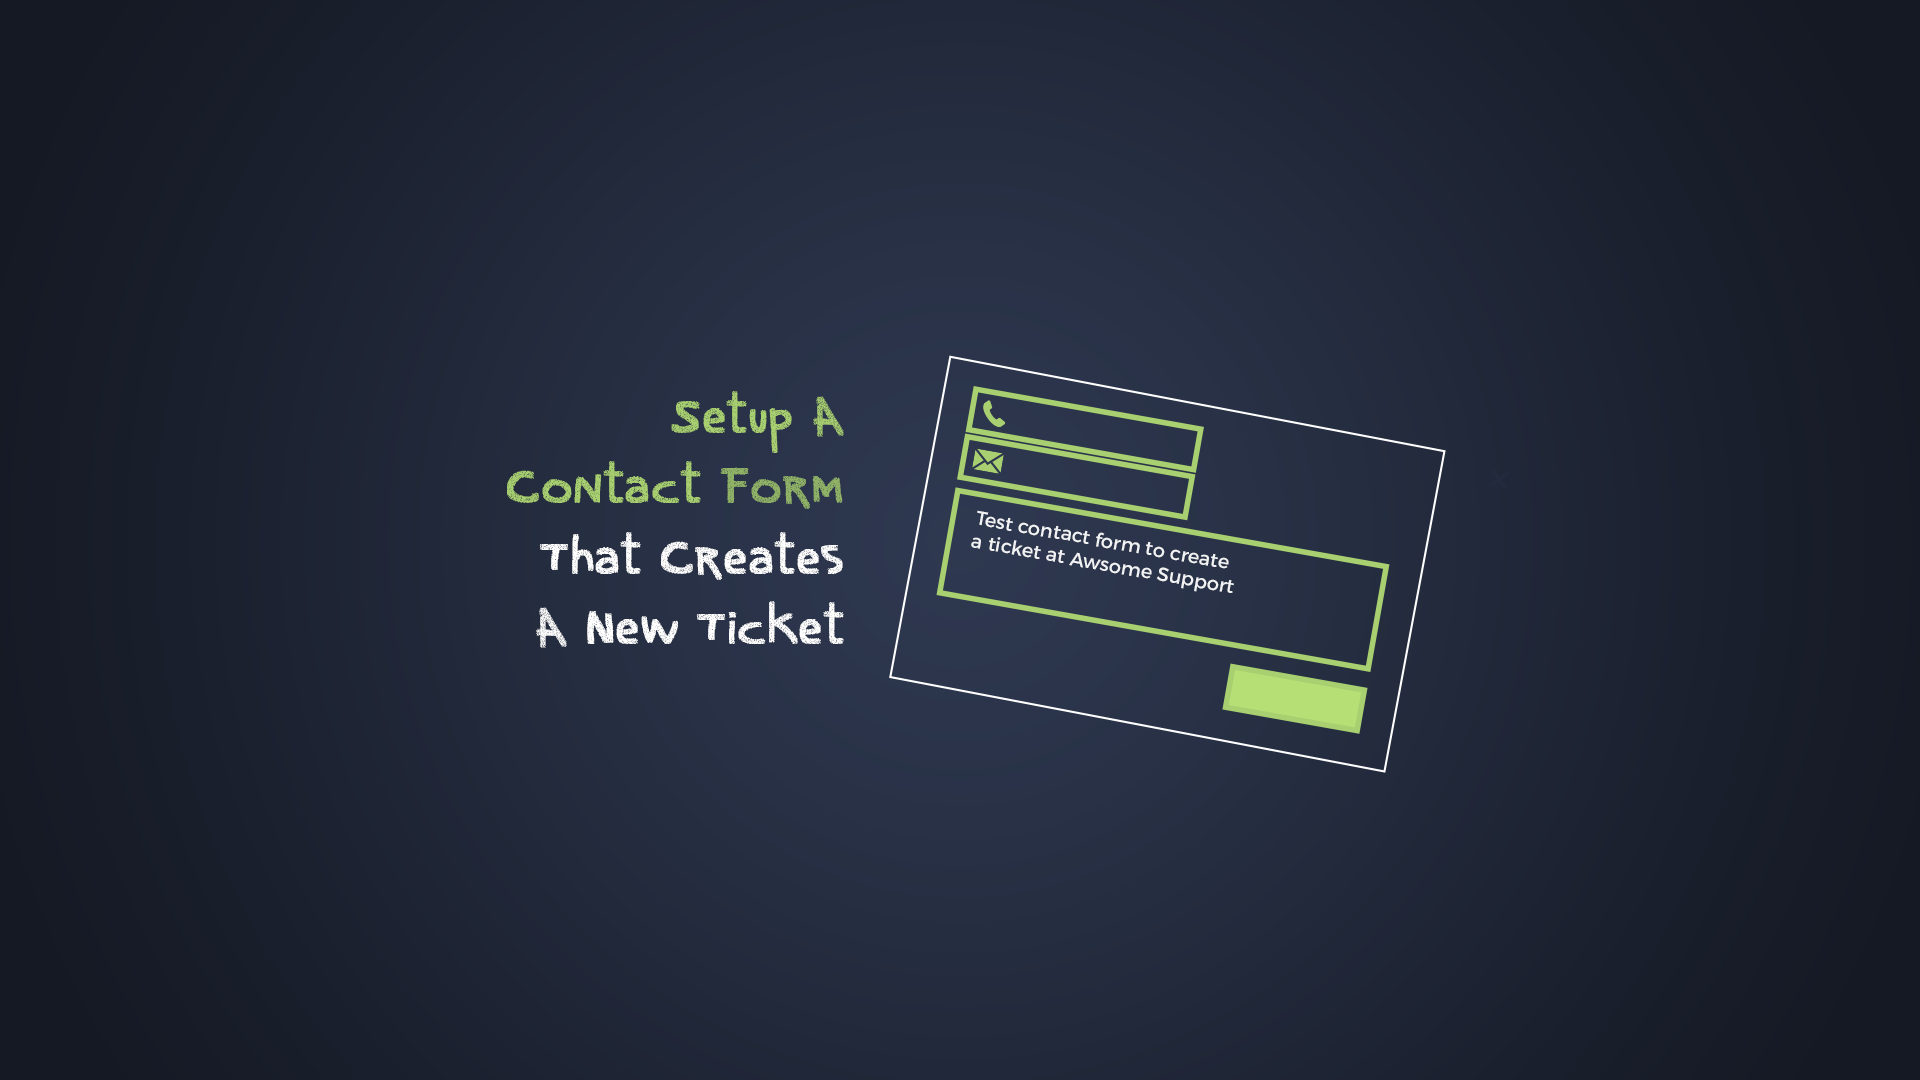 Setup A Contact Form That Creates A New Ticket